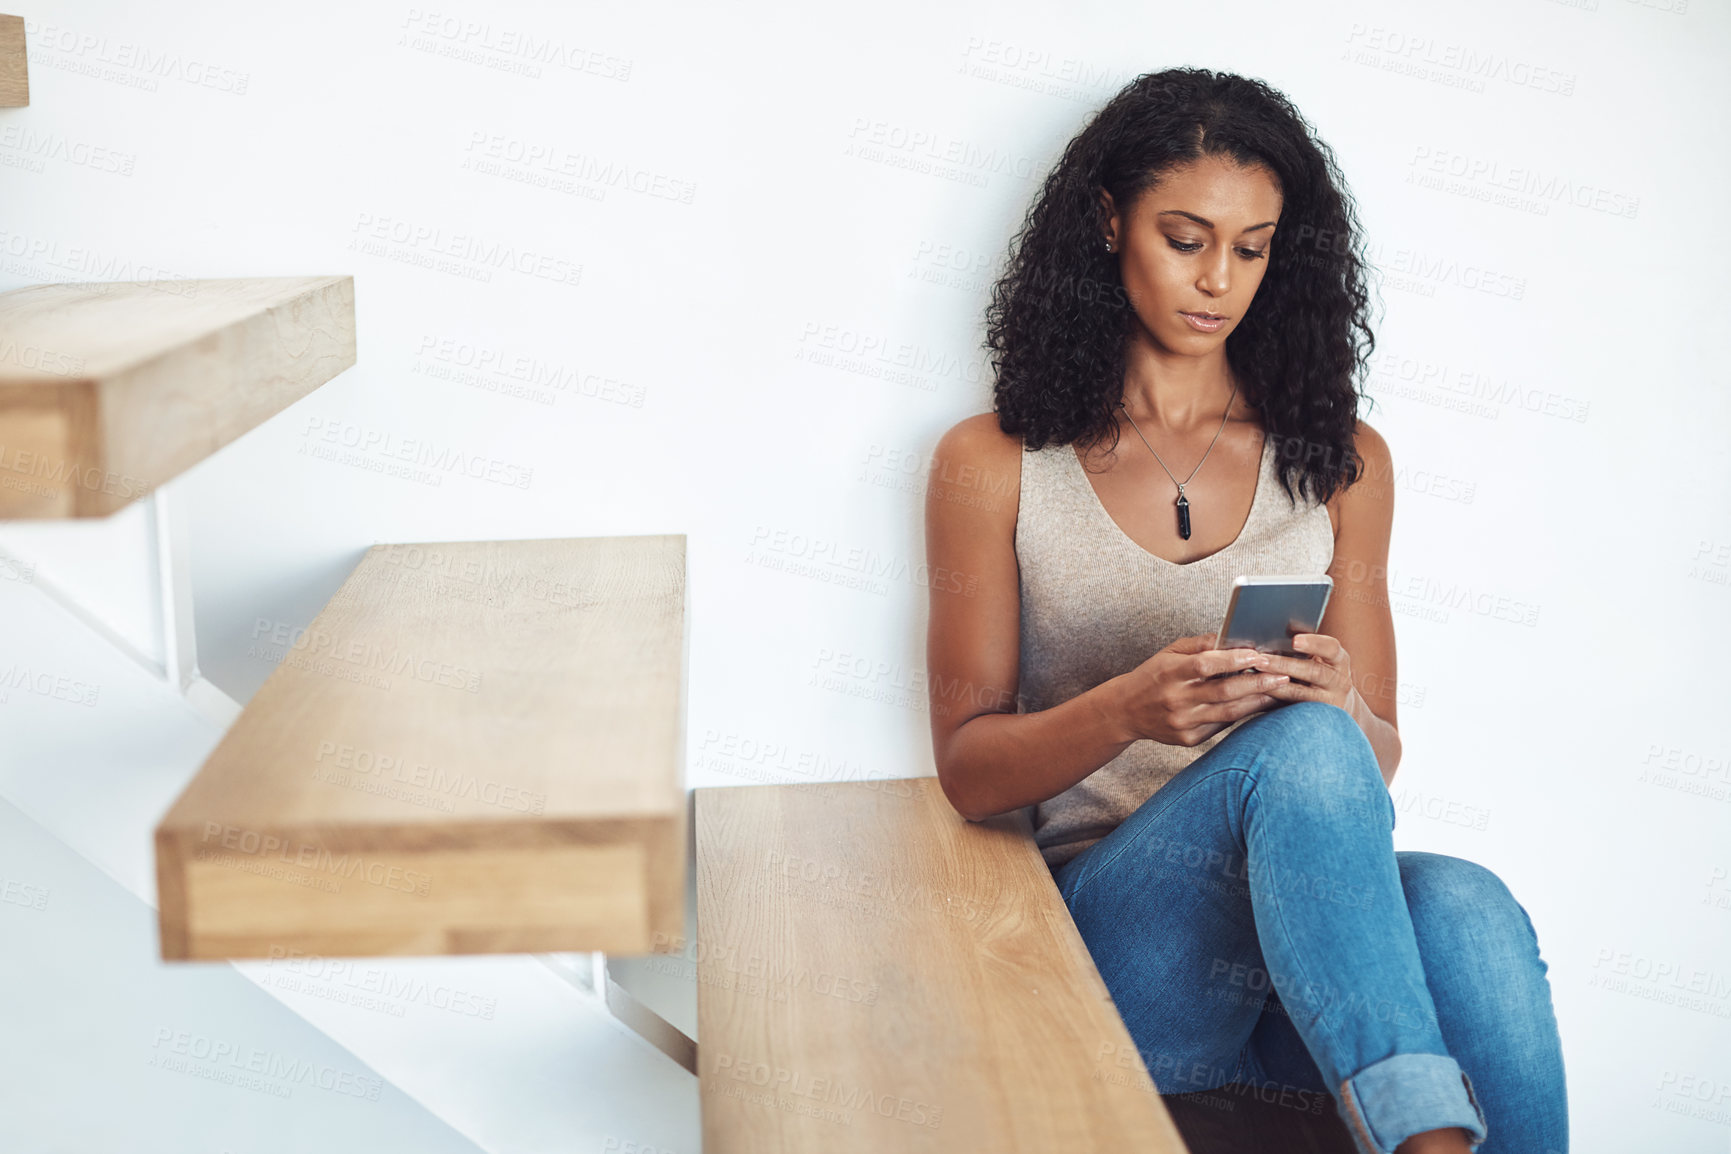 Buy stock photo Woman relaxing, looking and typing on phone sitting on wooden staircase. Attractive, casual and confident African American female reading on mobile. Taking a break and catching up on social media